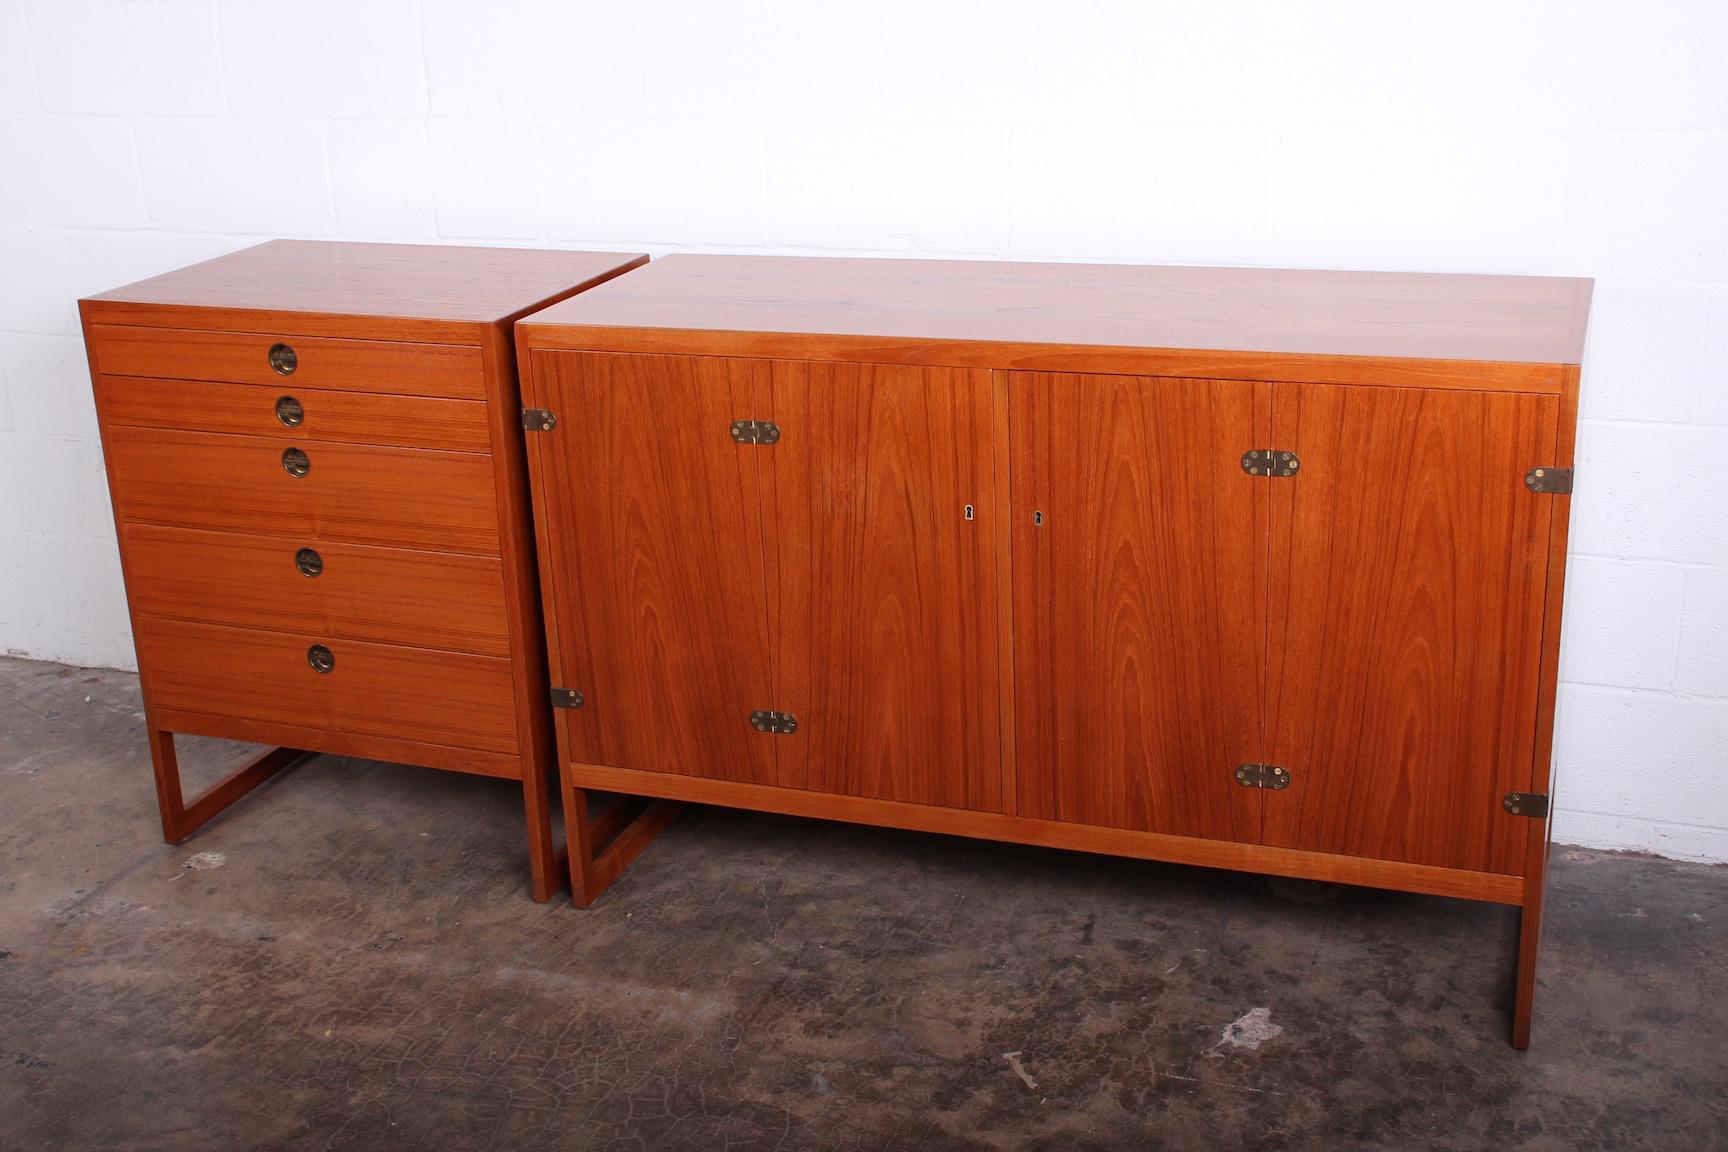 A pair of teak cabinets designed by Børge Mogensen 1957, manufactured by cabinetmaker P. Lauritsen & Son.

Large cabinet: 54.25